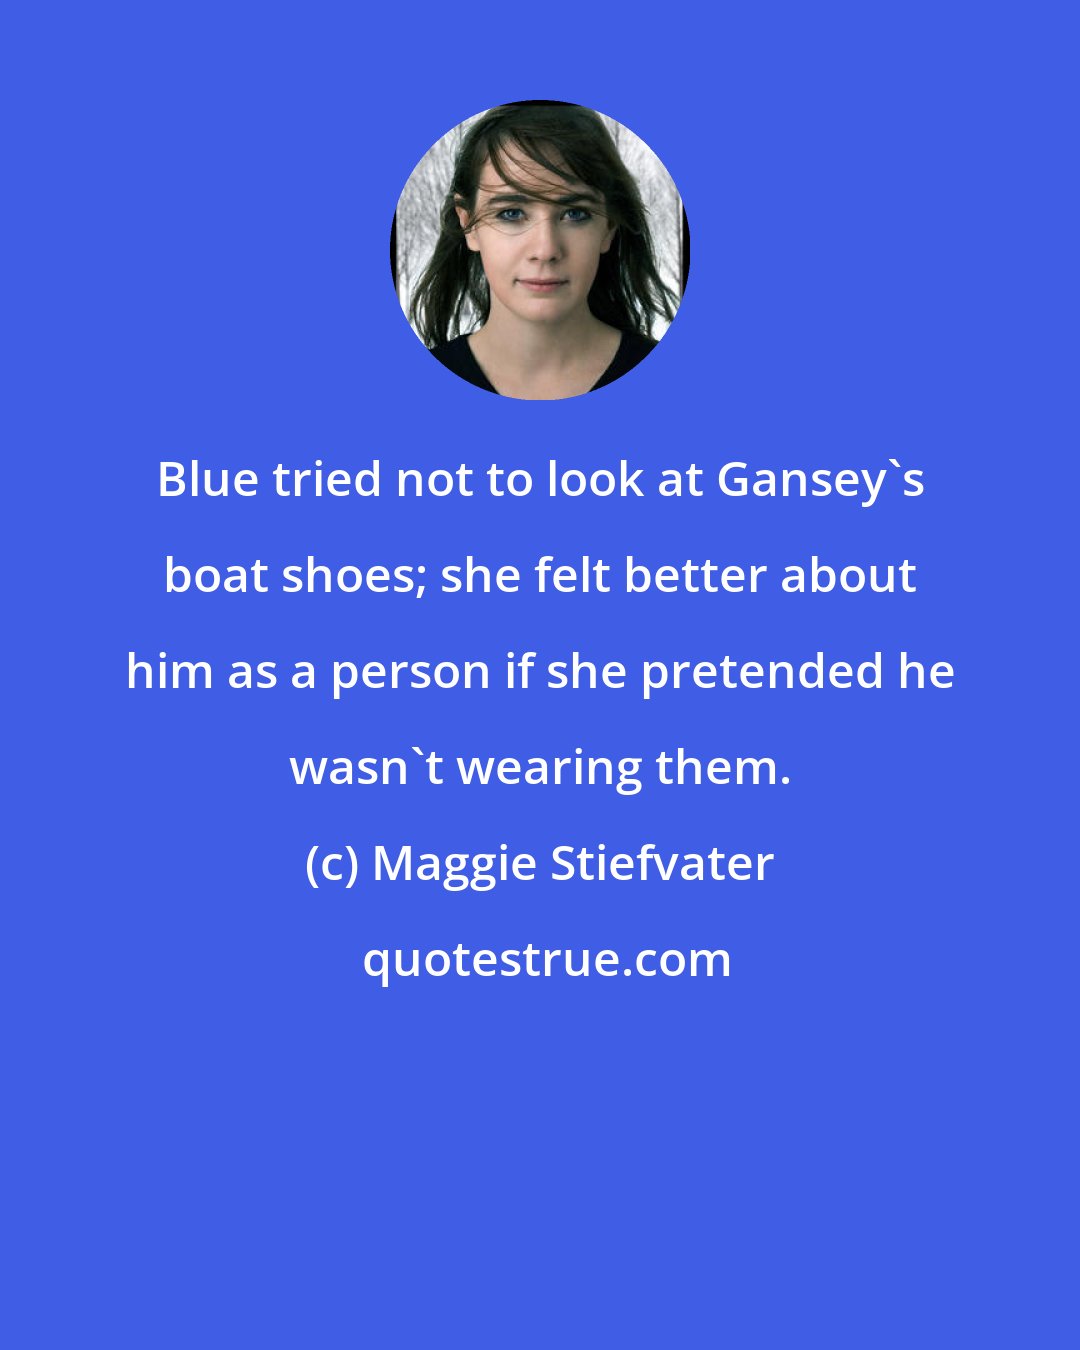 Maggie Stiefvater: Blue tried not to look at Gansey's boat shoes; she felt better about him as a person if she pretended he wasn't wearing them.